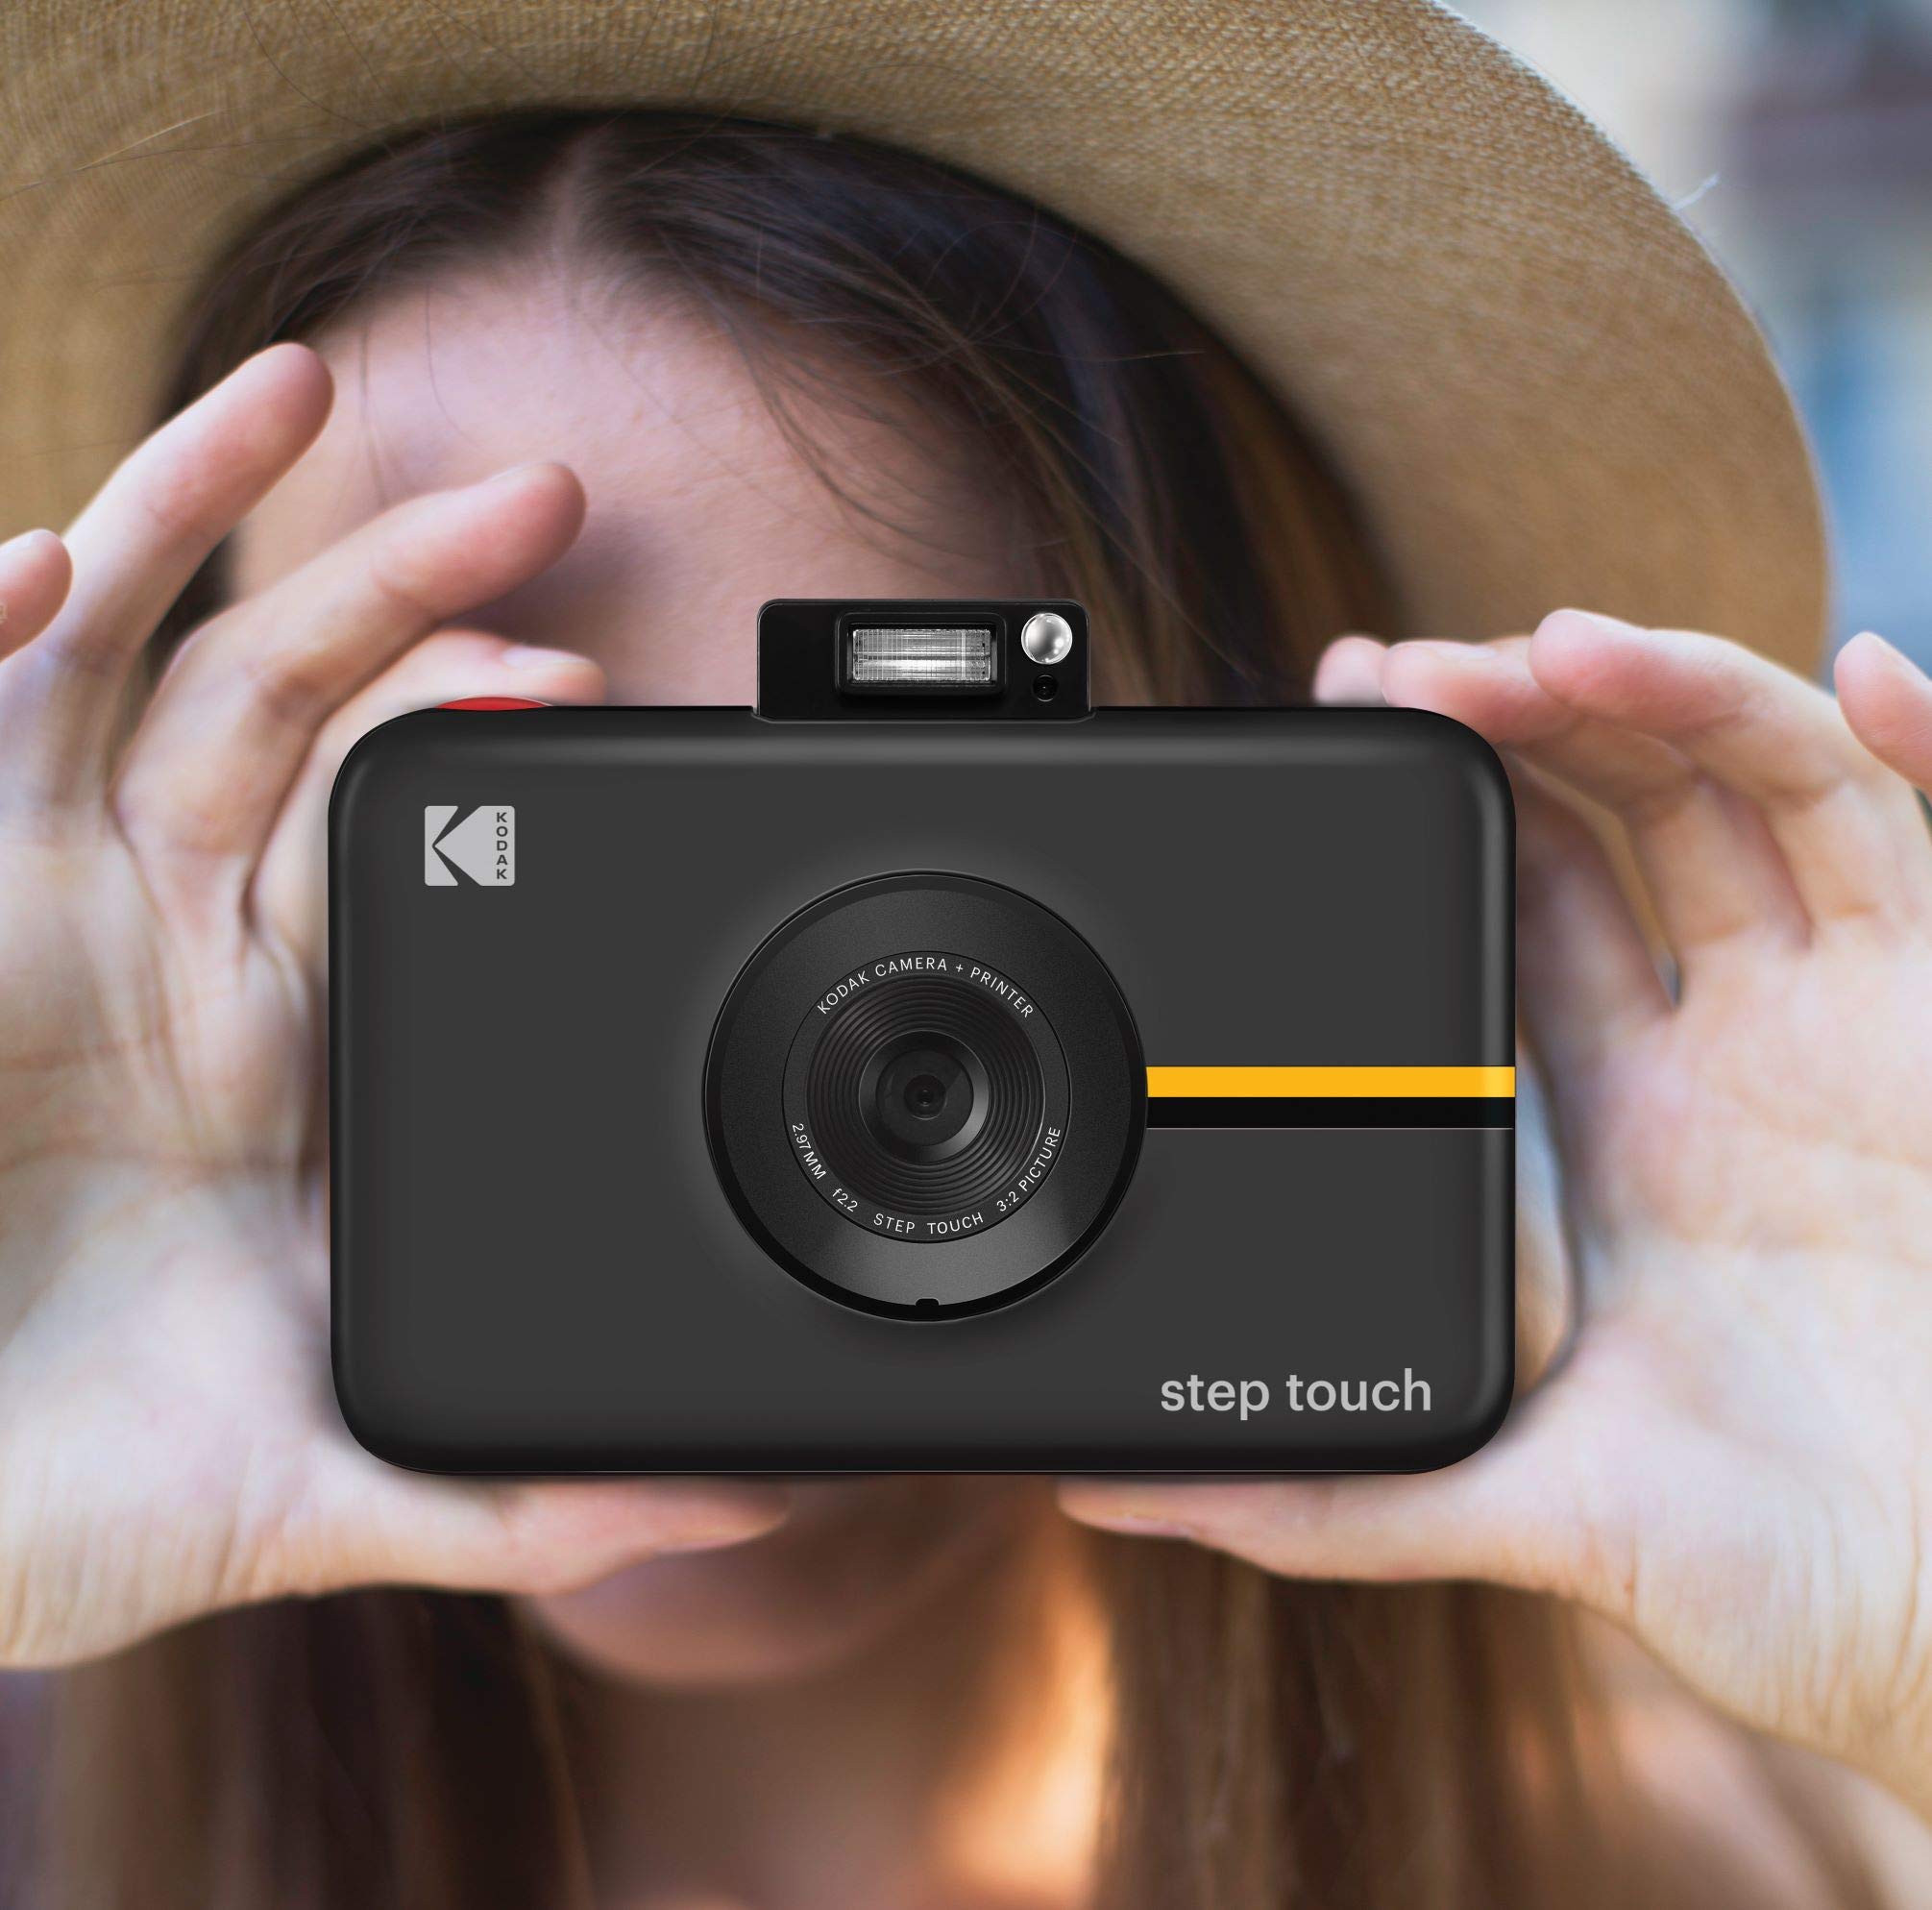 Kodak Step Touch | 13MP Digital Camera & Instant Printer with 3.5 LCD Touchscreen Display, 1080p HD Video - Editing Suite, Bluetooth & Zink Zero Ink Technology | Black